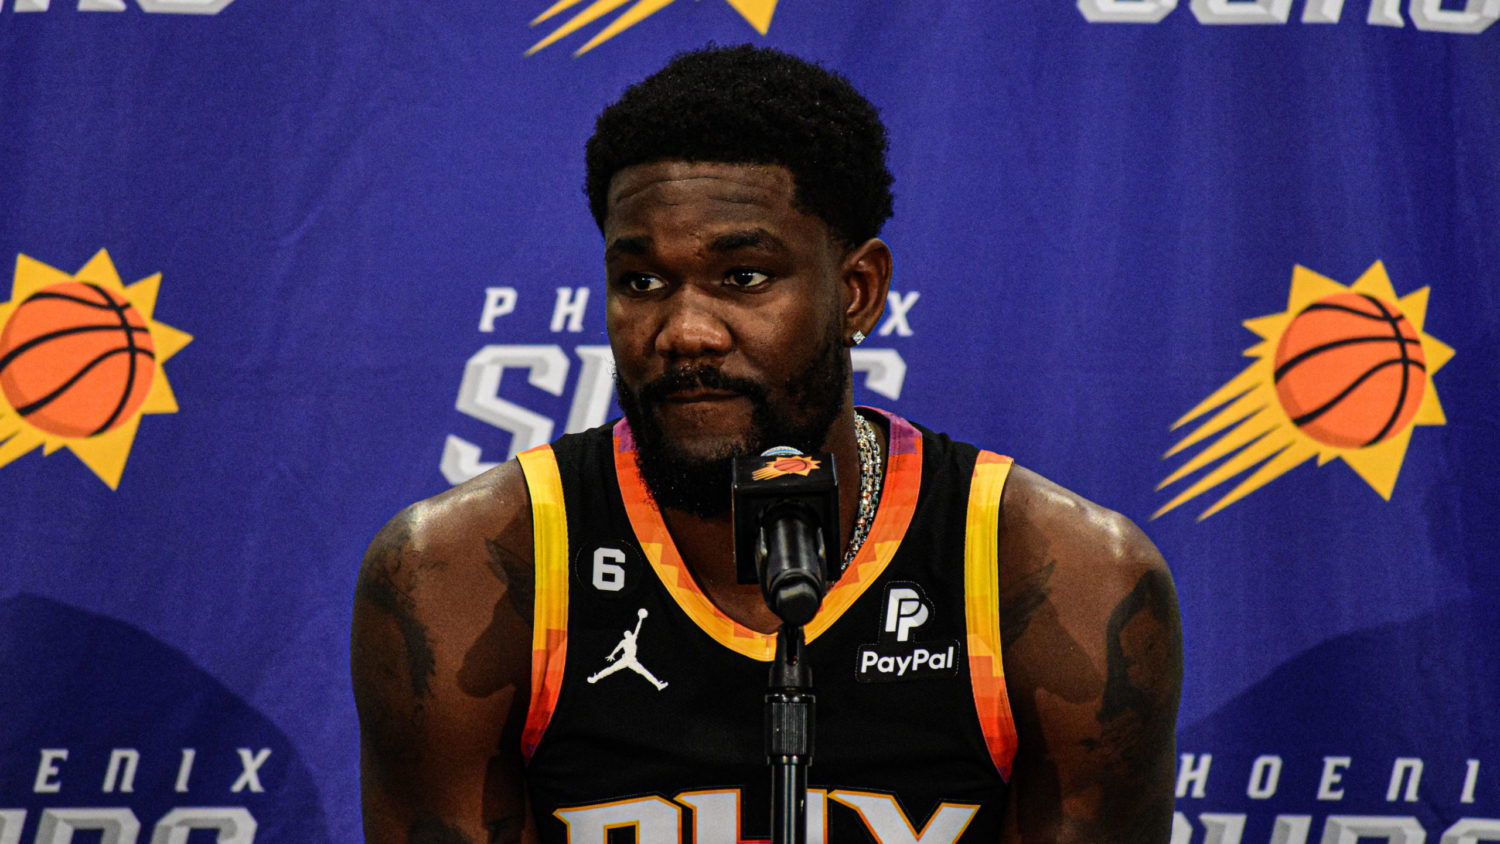 Phoenix Suns center Deandre Ayton speaks with the media at the team's media day (Photo by Jeremy Sc...